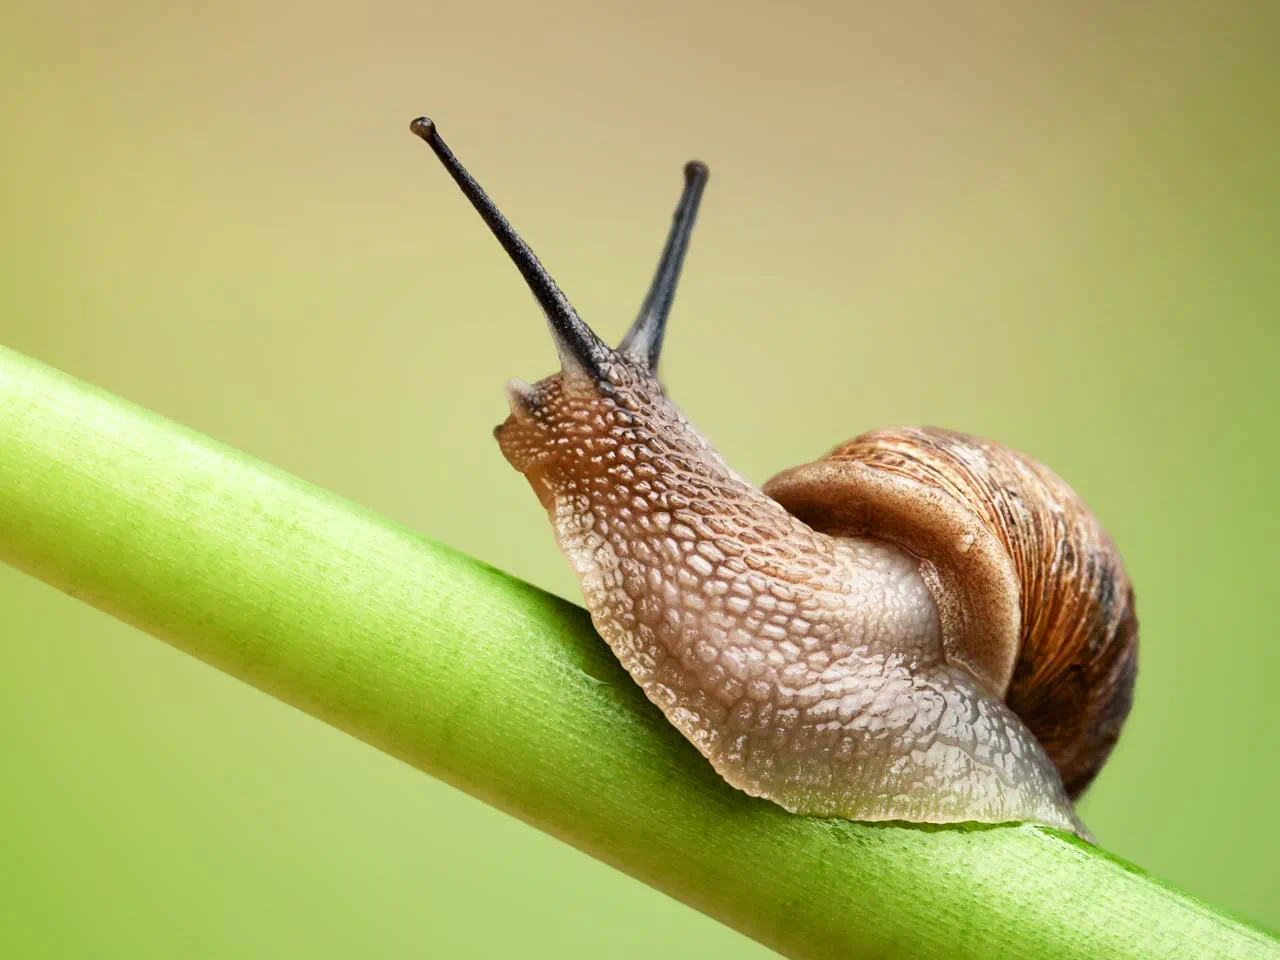 How to Get Rid of Slugs and Snails? - 4 Effective Methods